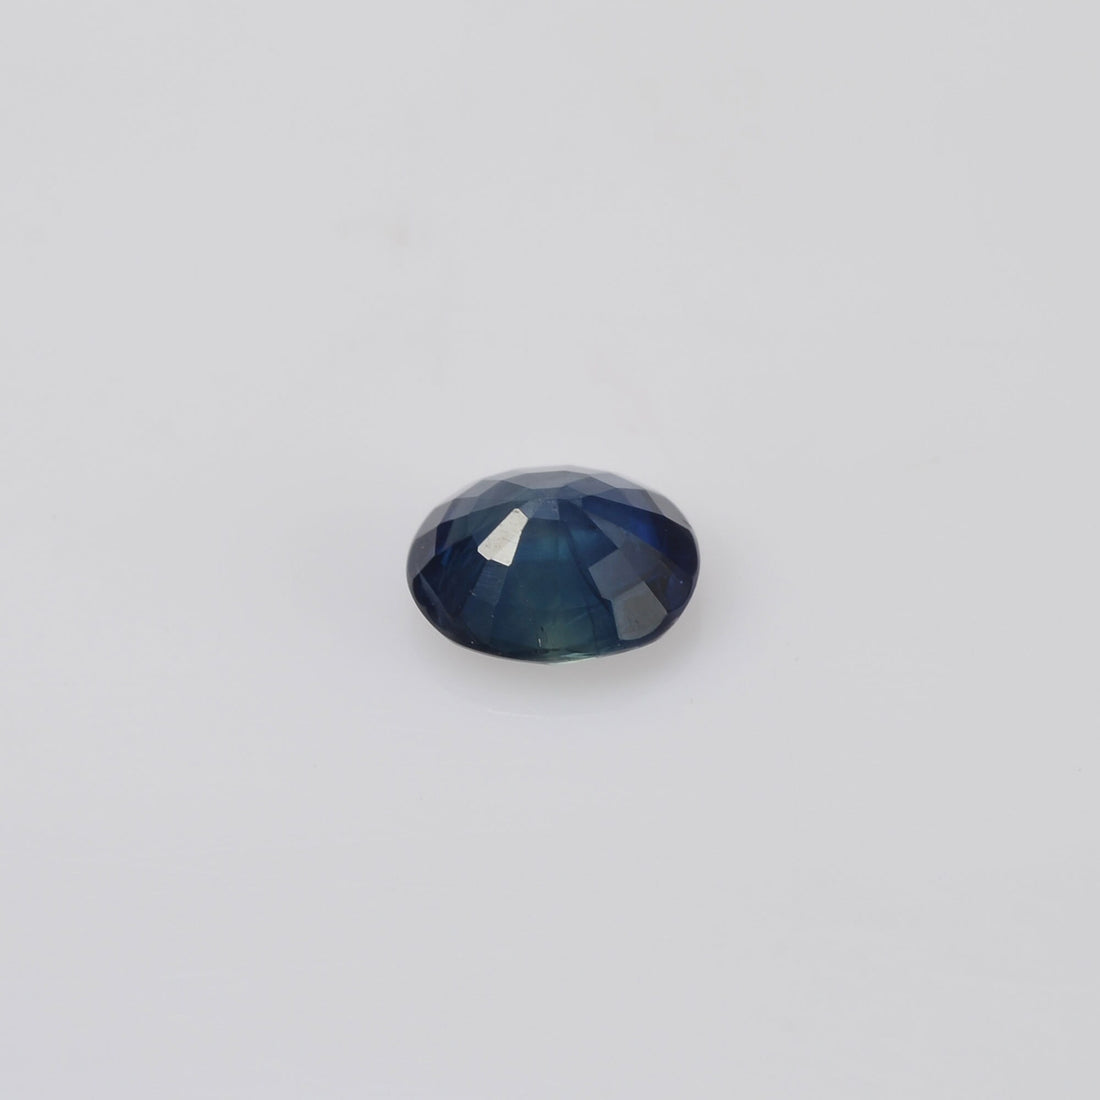 0.65 cts Natural Blue Sapphire Loose Gemstone Oval Cut